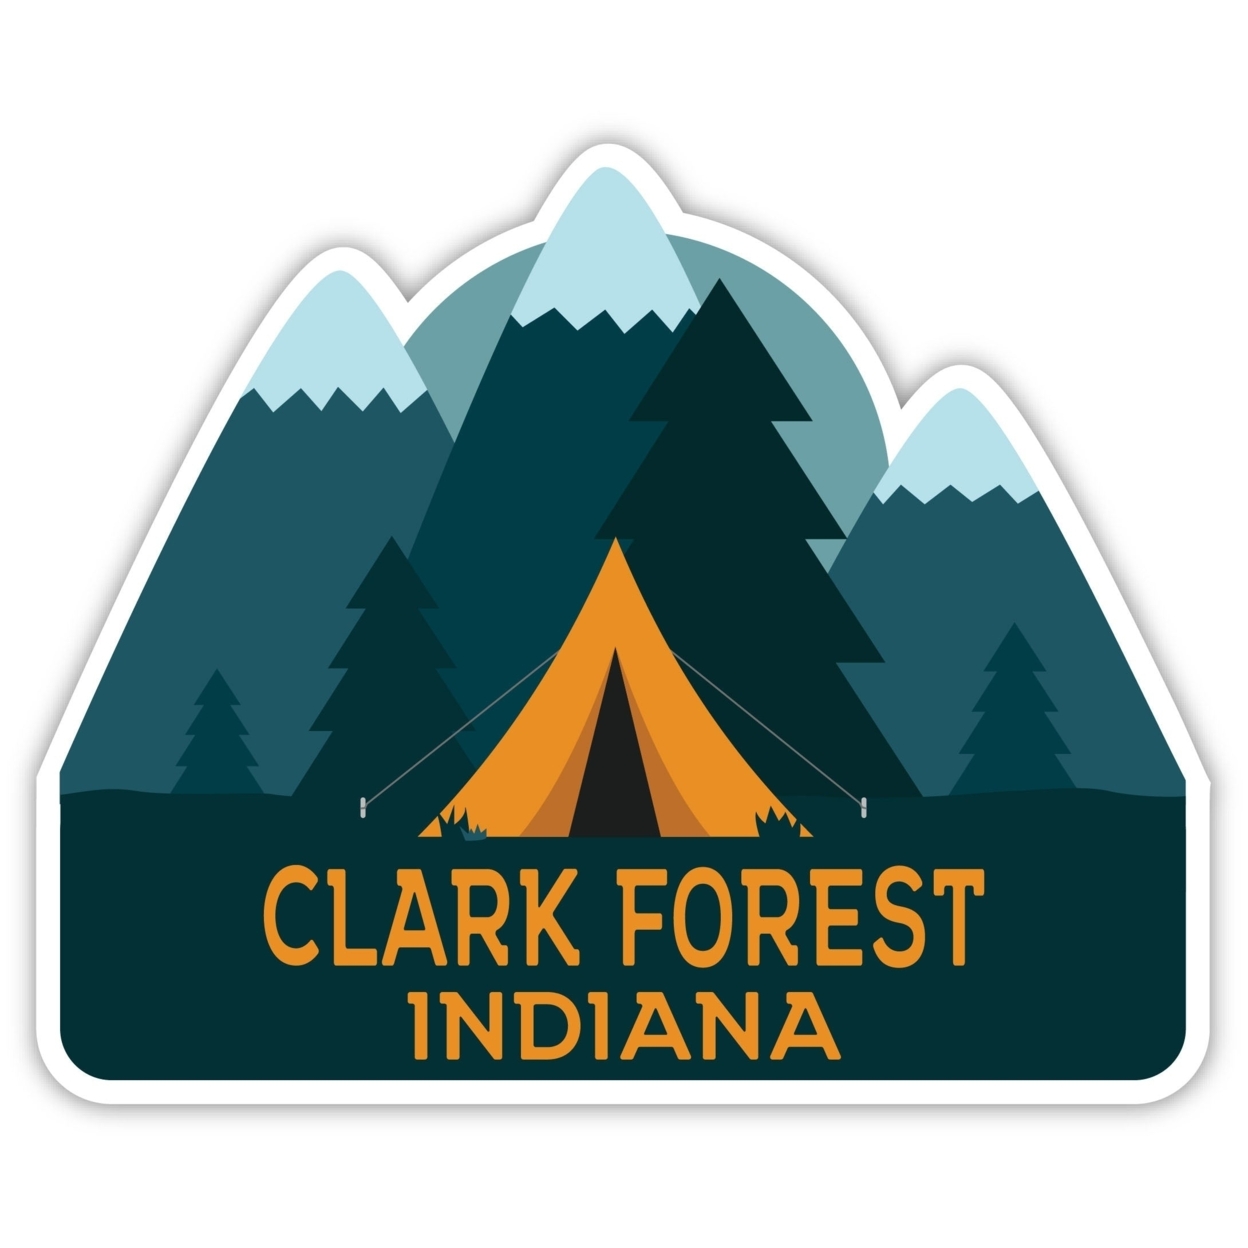 Clark Forest Indiana Souvenir Decorative Stickers (Choose Theme And Size) - Single Unit, 4-Inch, Tent